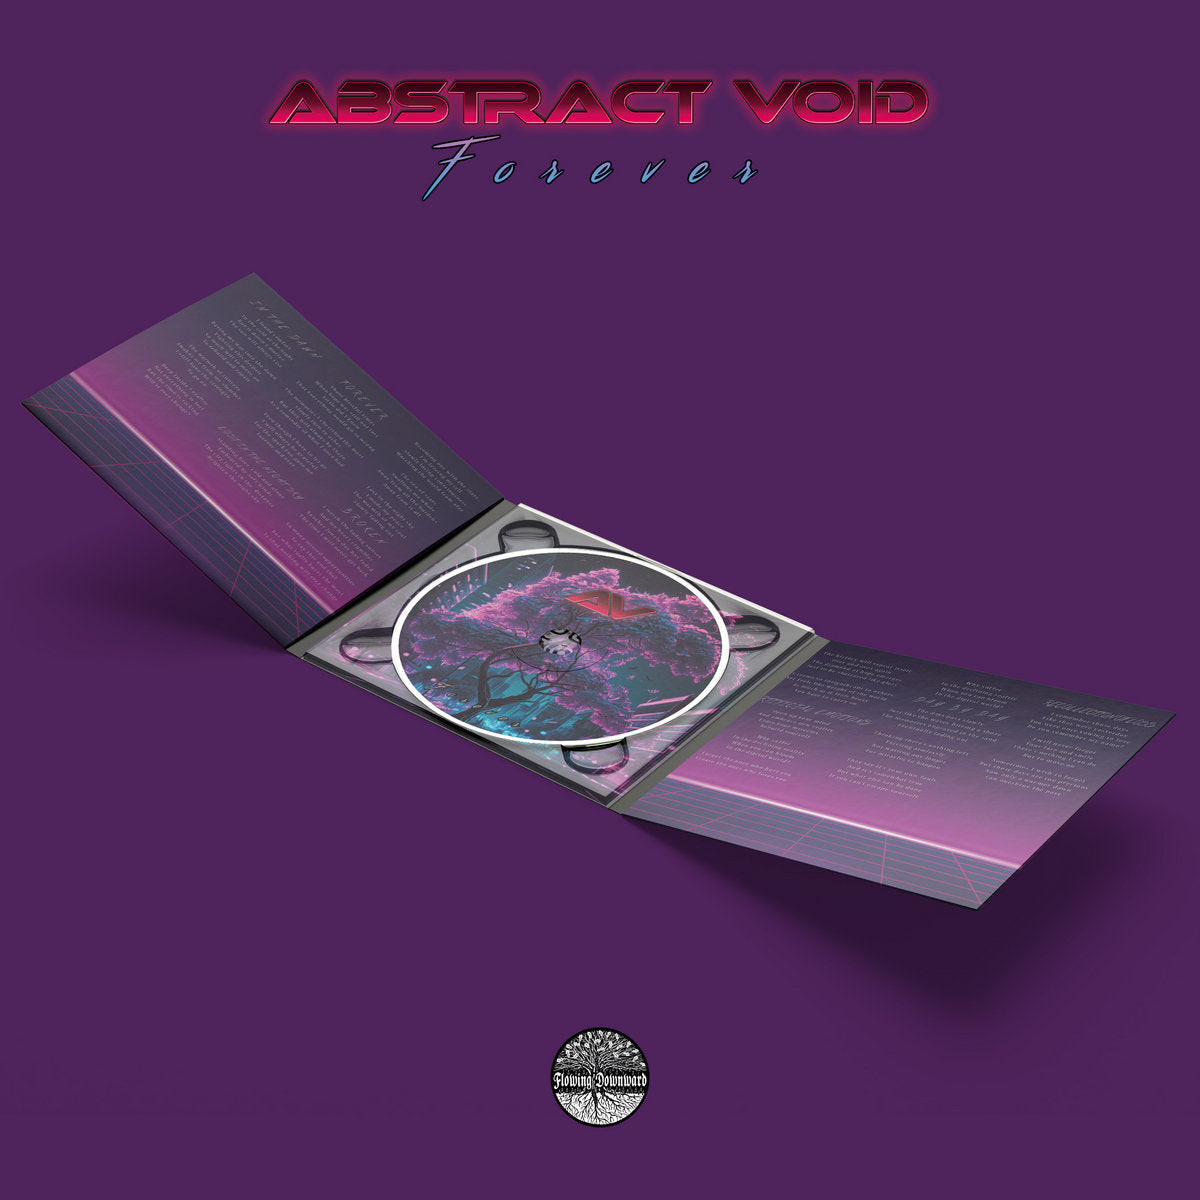 [SOLD OUT] ABSTRACT VOID "Forever" CD (digipak)